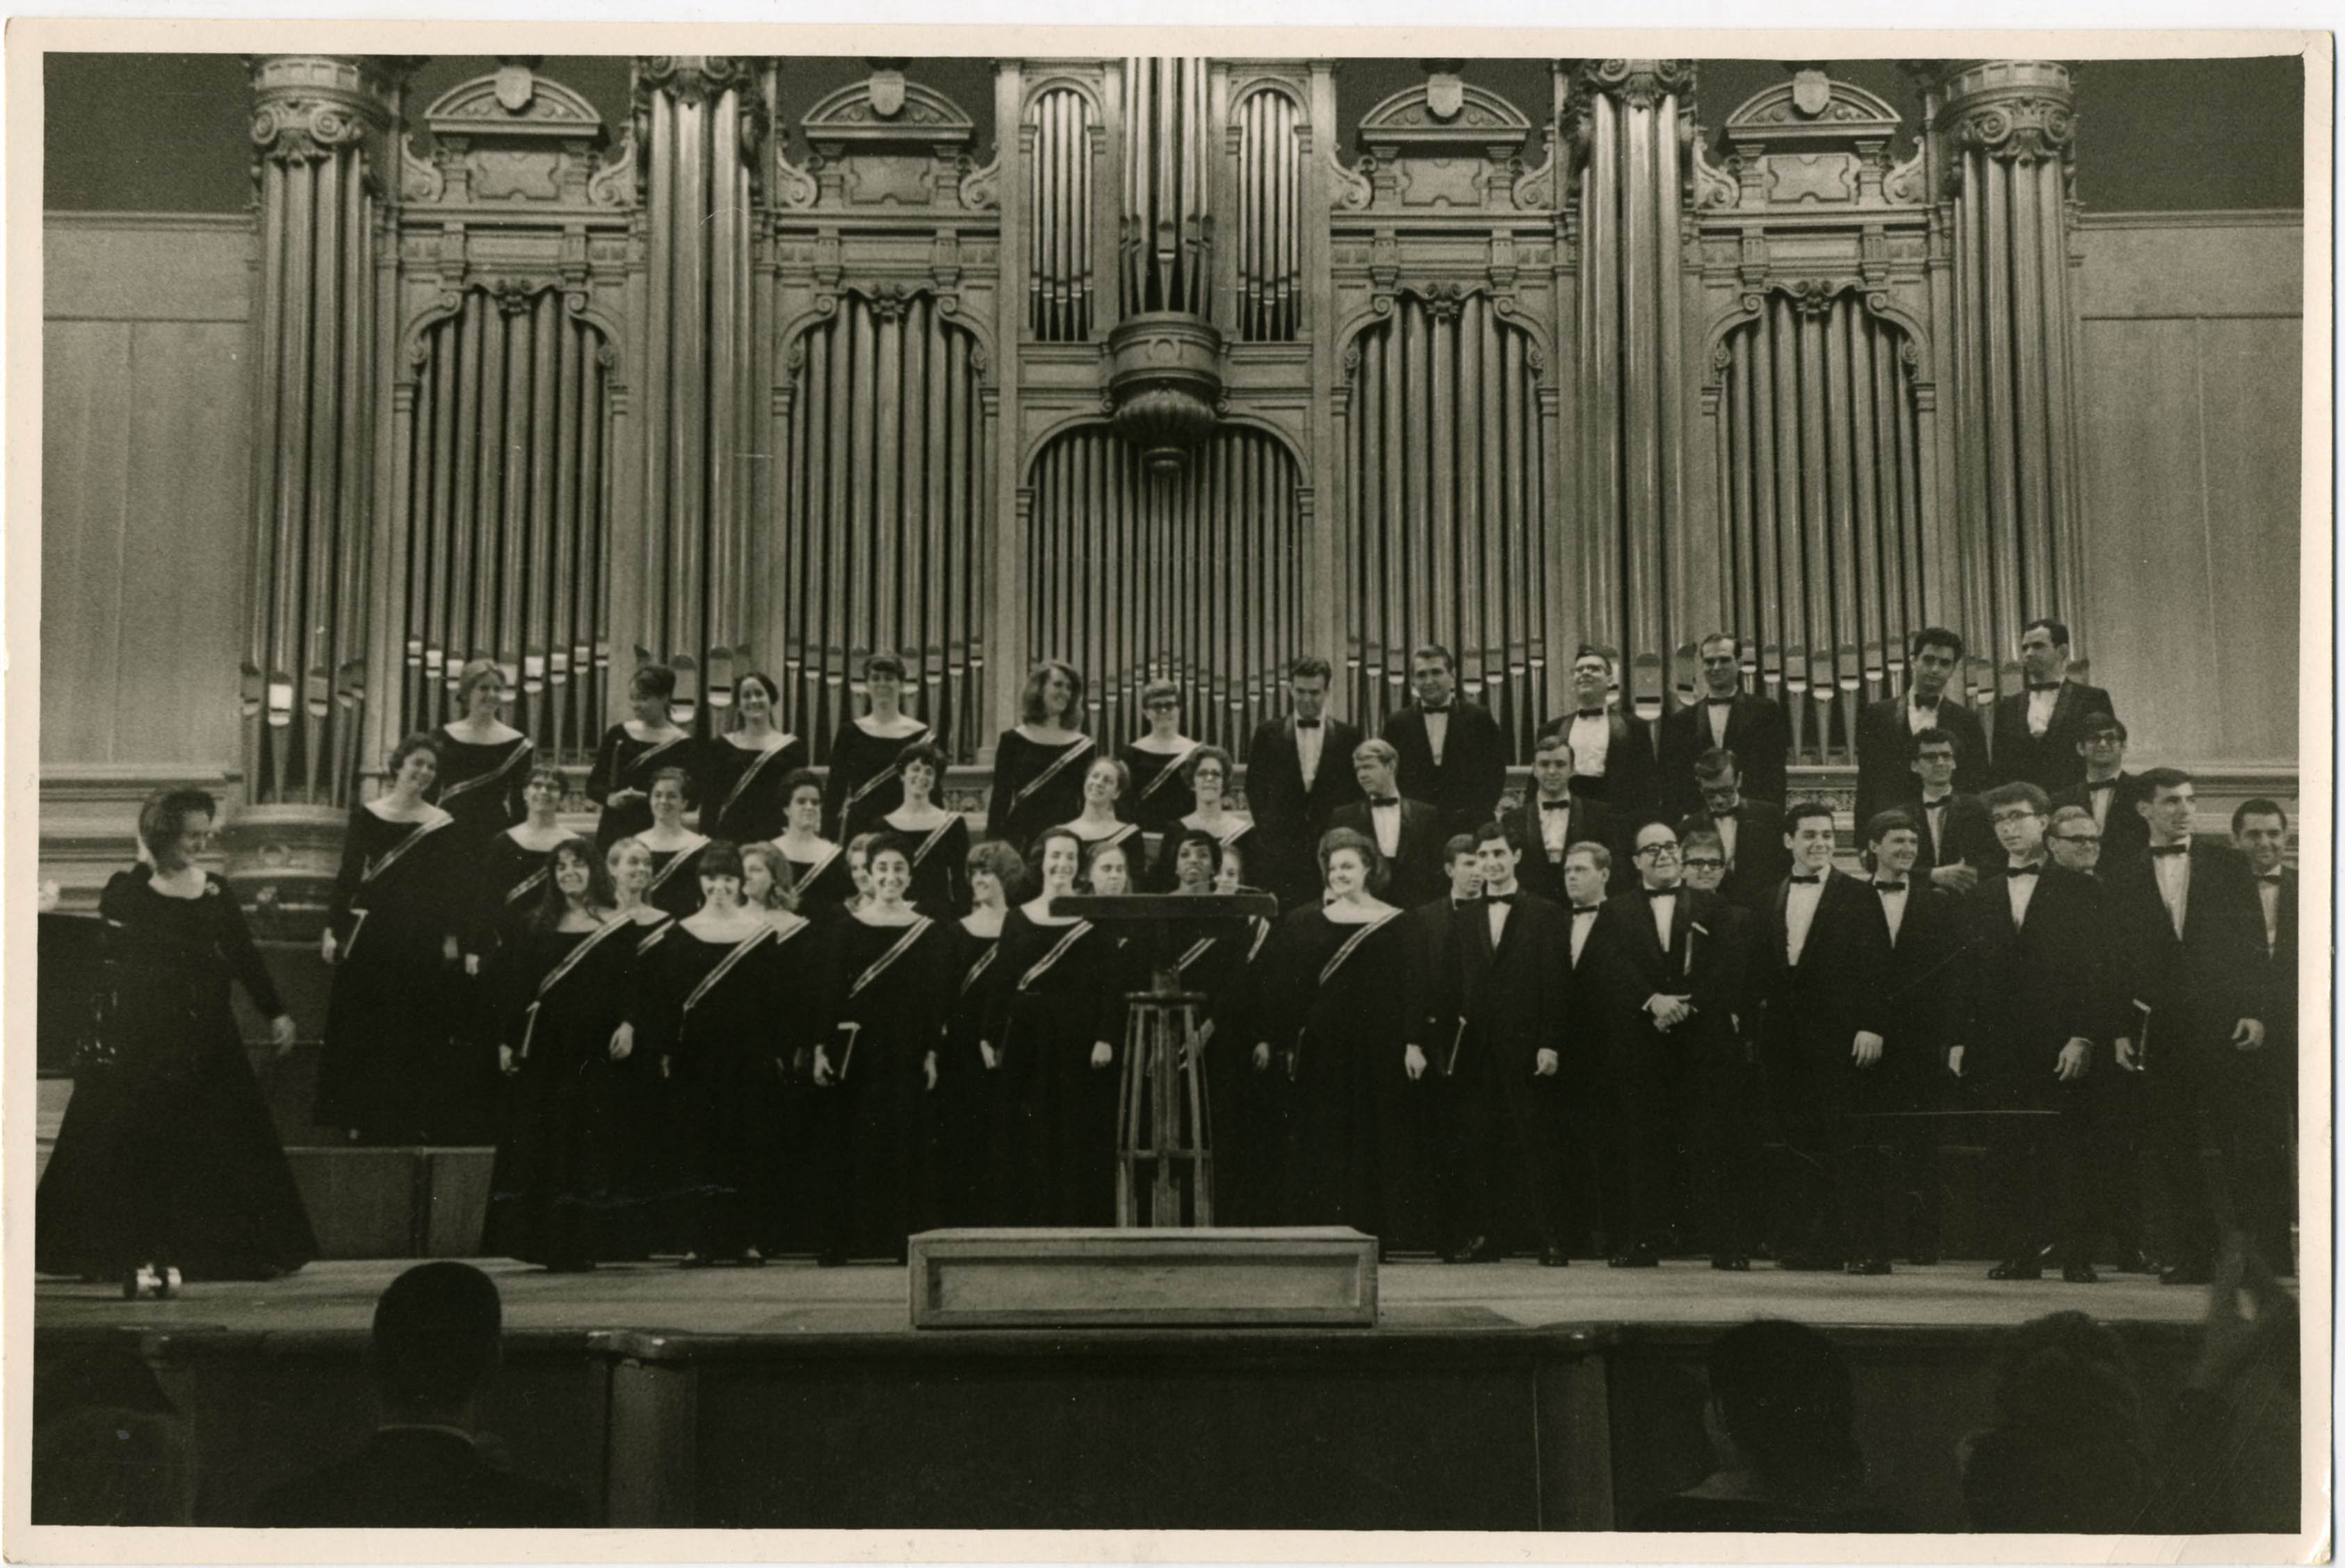 Lorna Cooke deVaron poses with the NEC Chorus in a concert hall in Moscow in 1966.